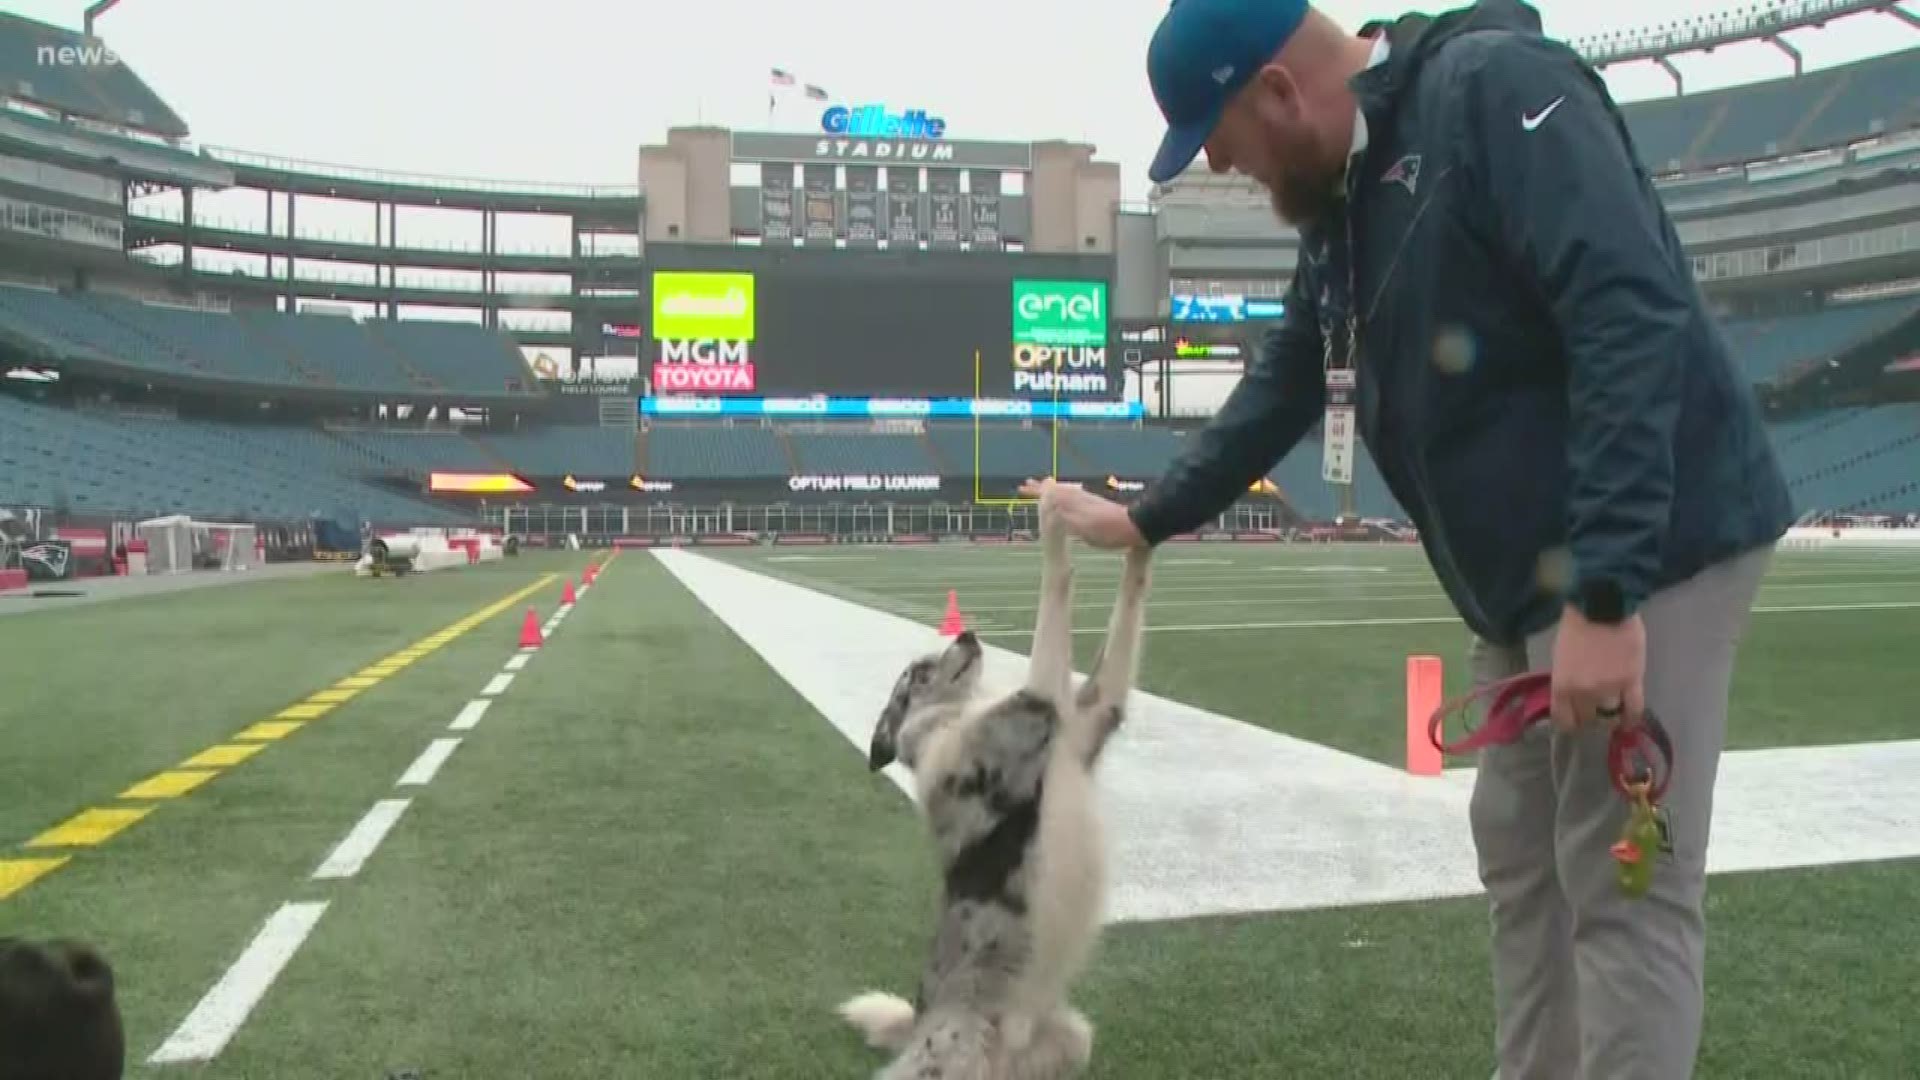 Ryan Bjorn of Old Town has a four-legged assistant to help him take care of the fields at Gillette Stadium.